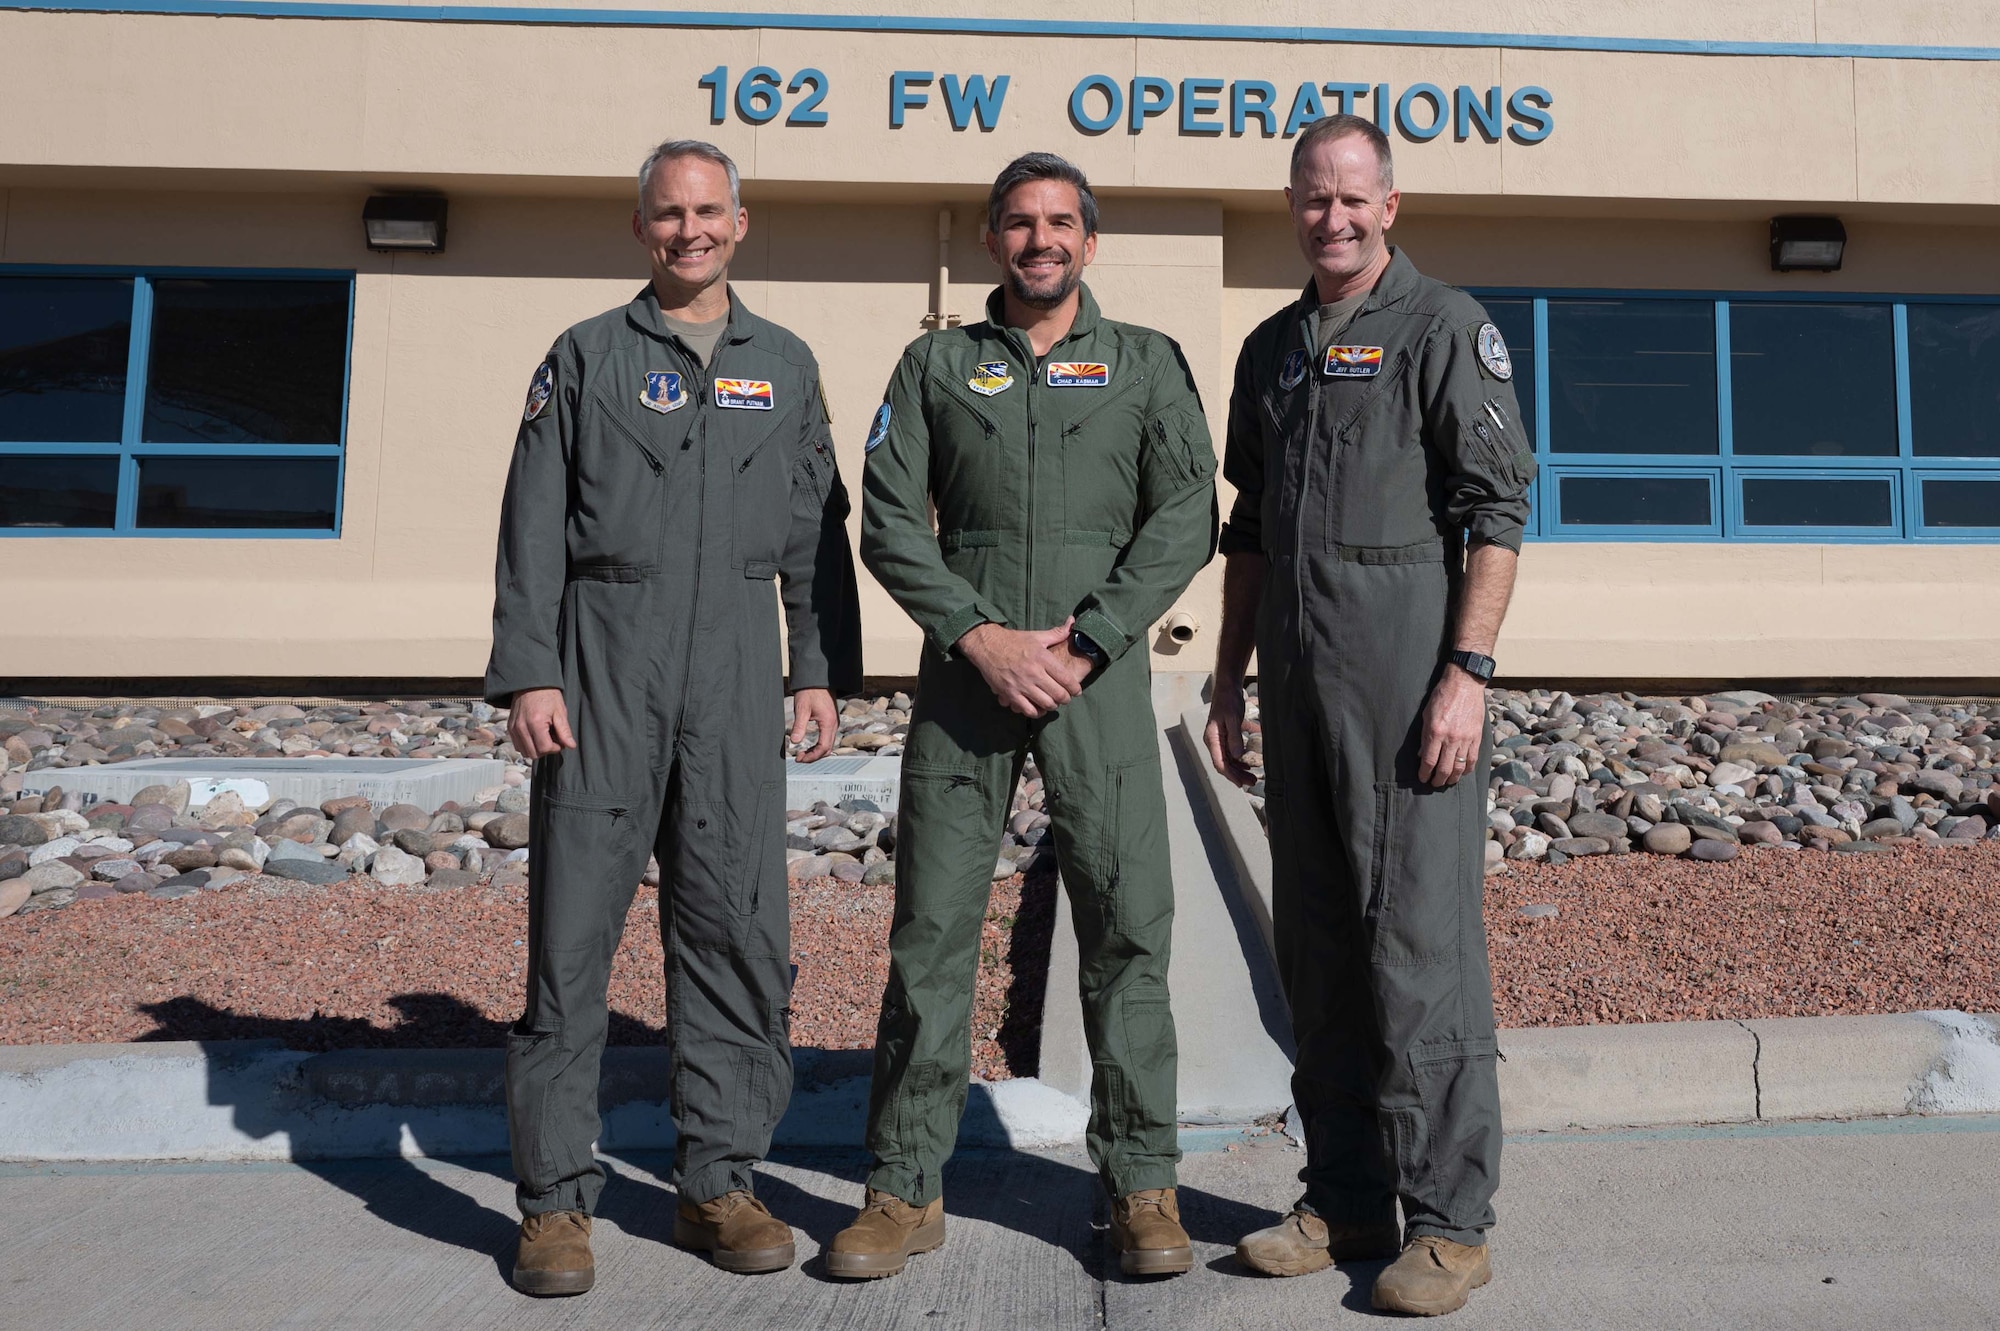 Col. Brant Putnam, the 162nd Wing Vice Commander, Chad Kasmar, Tucson Police Department Chief of Police, and Brig Gen. Jeffrey Butler, 162nd Wing Commander, gather outside the 162nd Wing Operations Group building before Chief Kasmar flew in an F-16 with Col. Putnam as his pilot. (U.S. Air Force photo by Maj. Angela Walz)